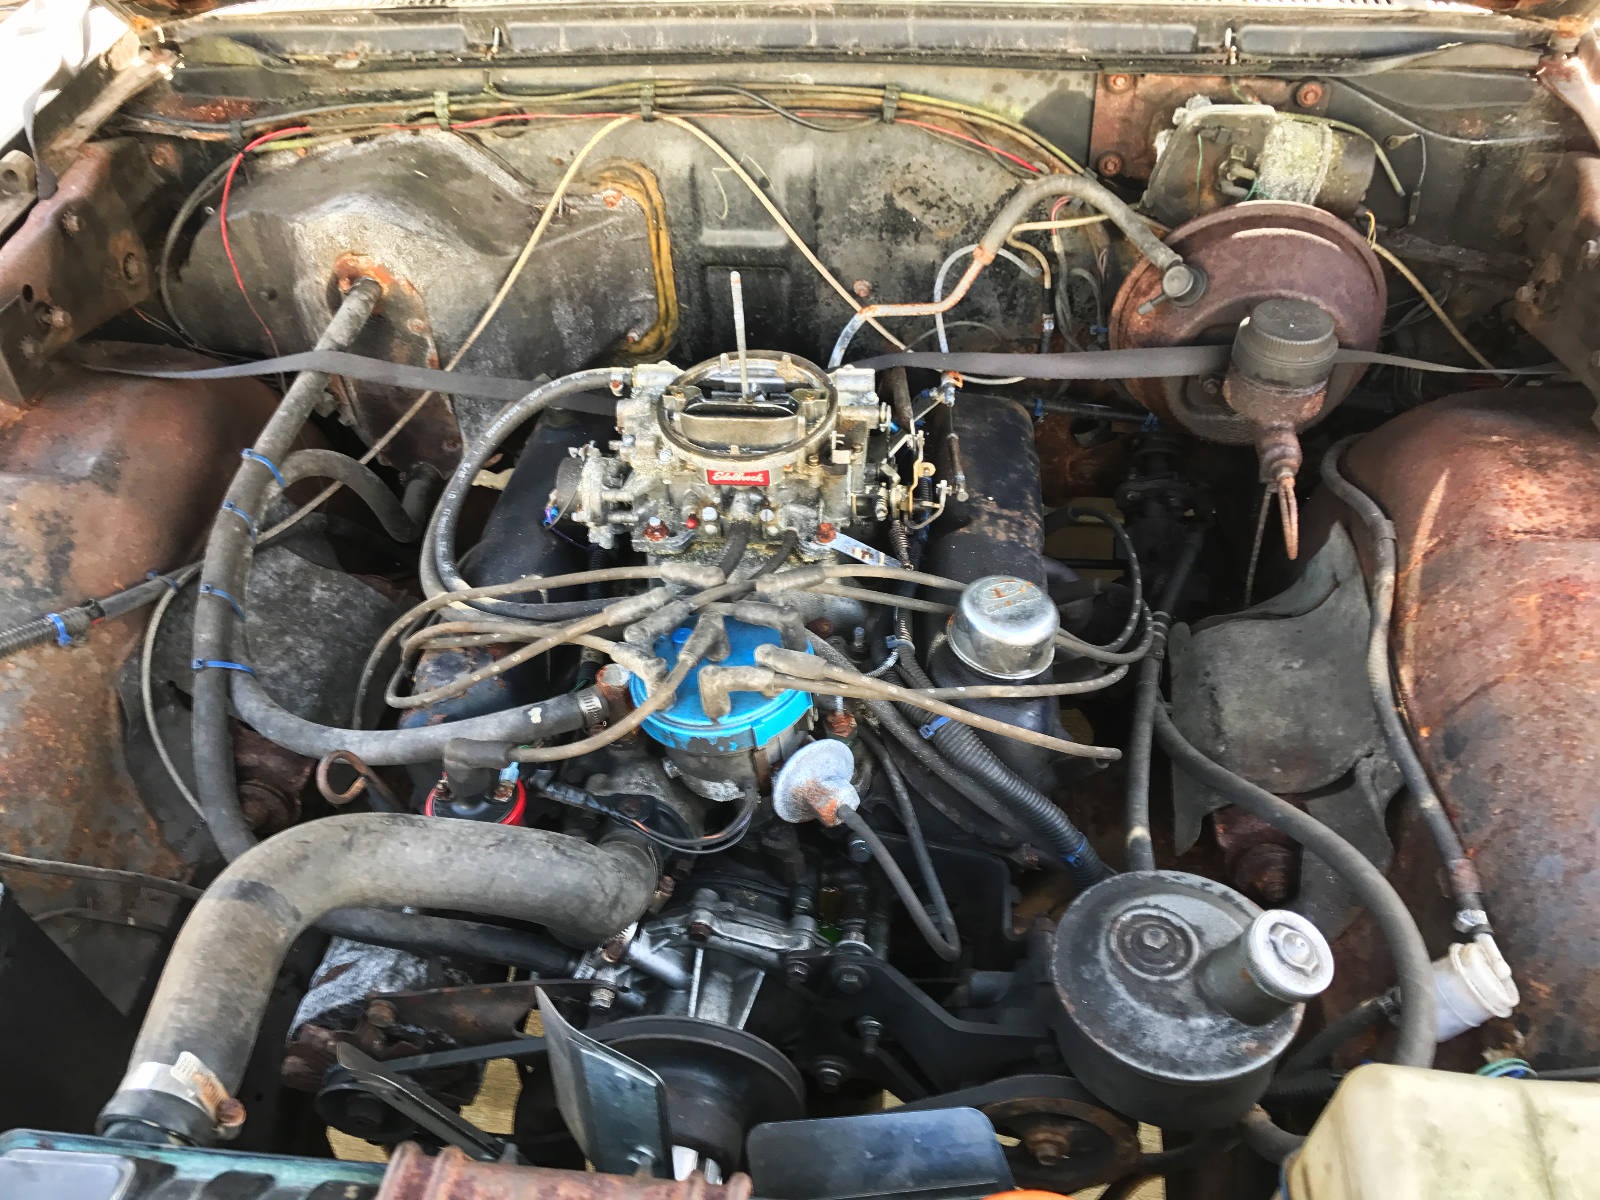 https://barnfinds.com/wp-content/uploads/2017/03/1965-Ford-Galaxie-Engine.jpg